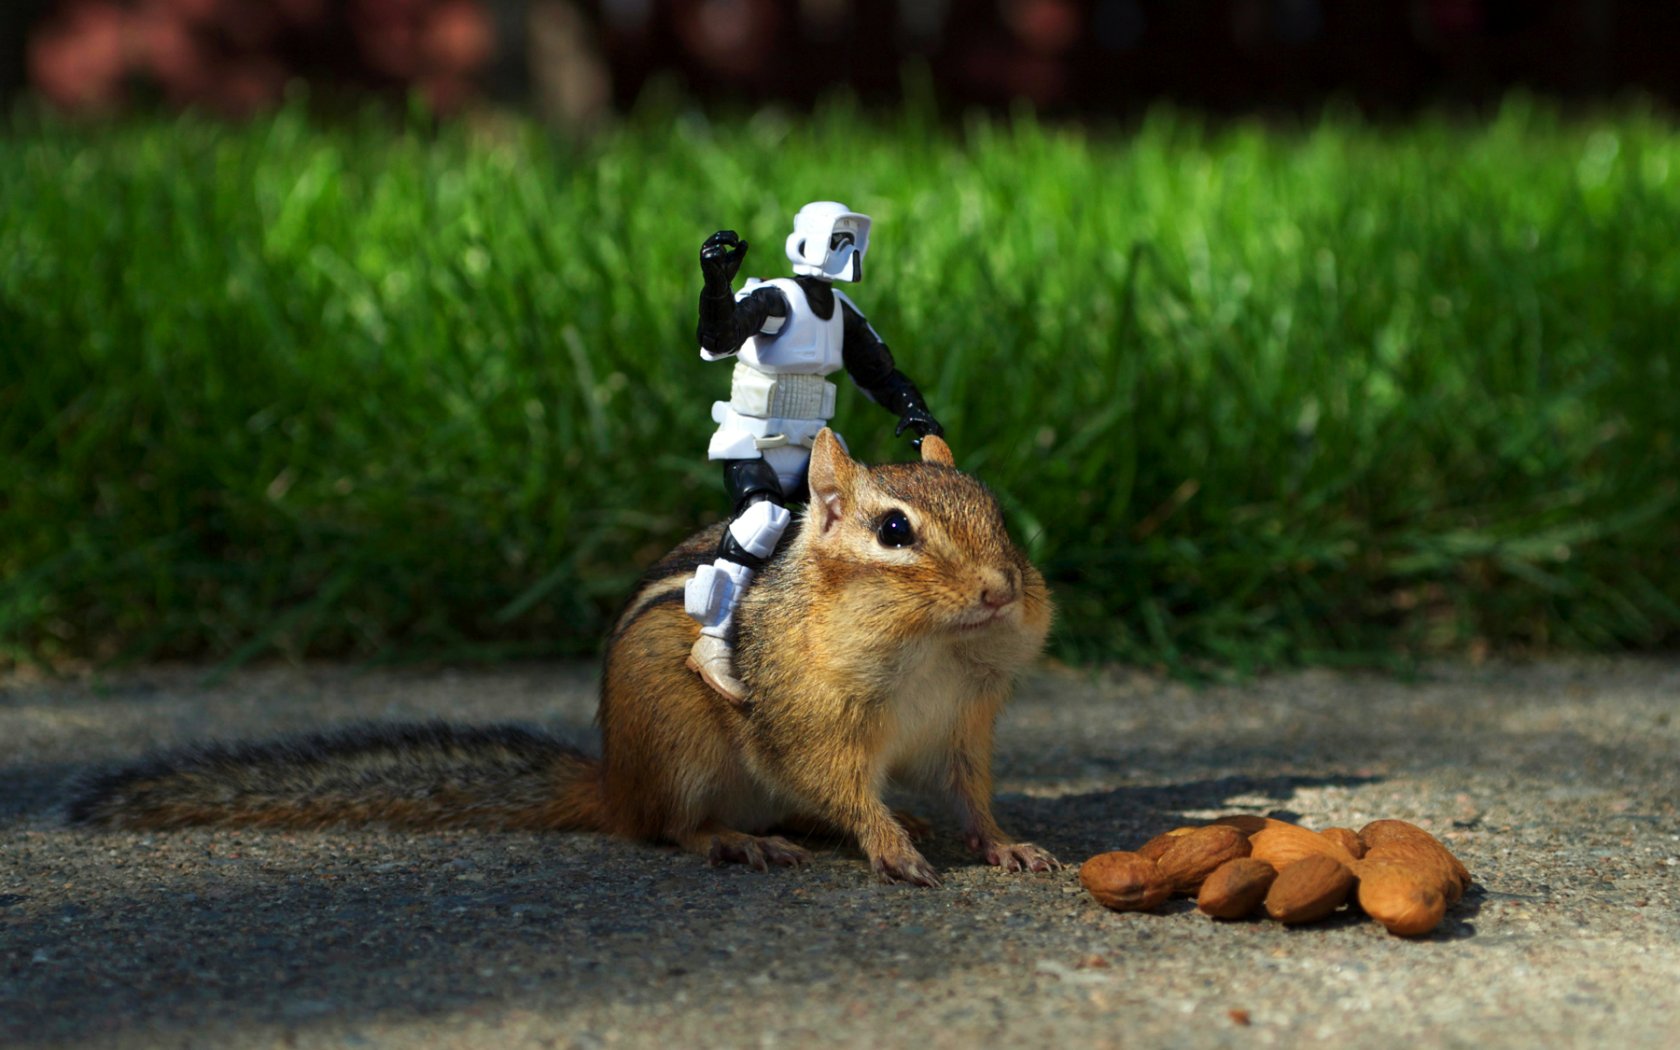 stormtroopers, Animals, Grass, Outdoors, Nuts, Chipmunks Wallpaper